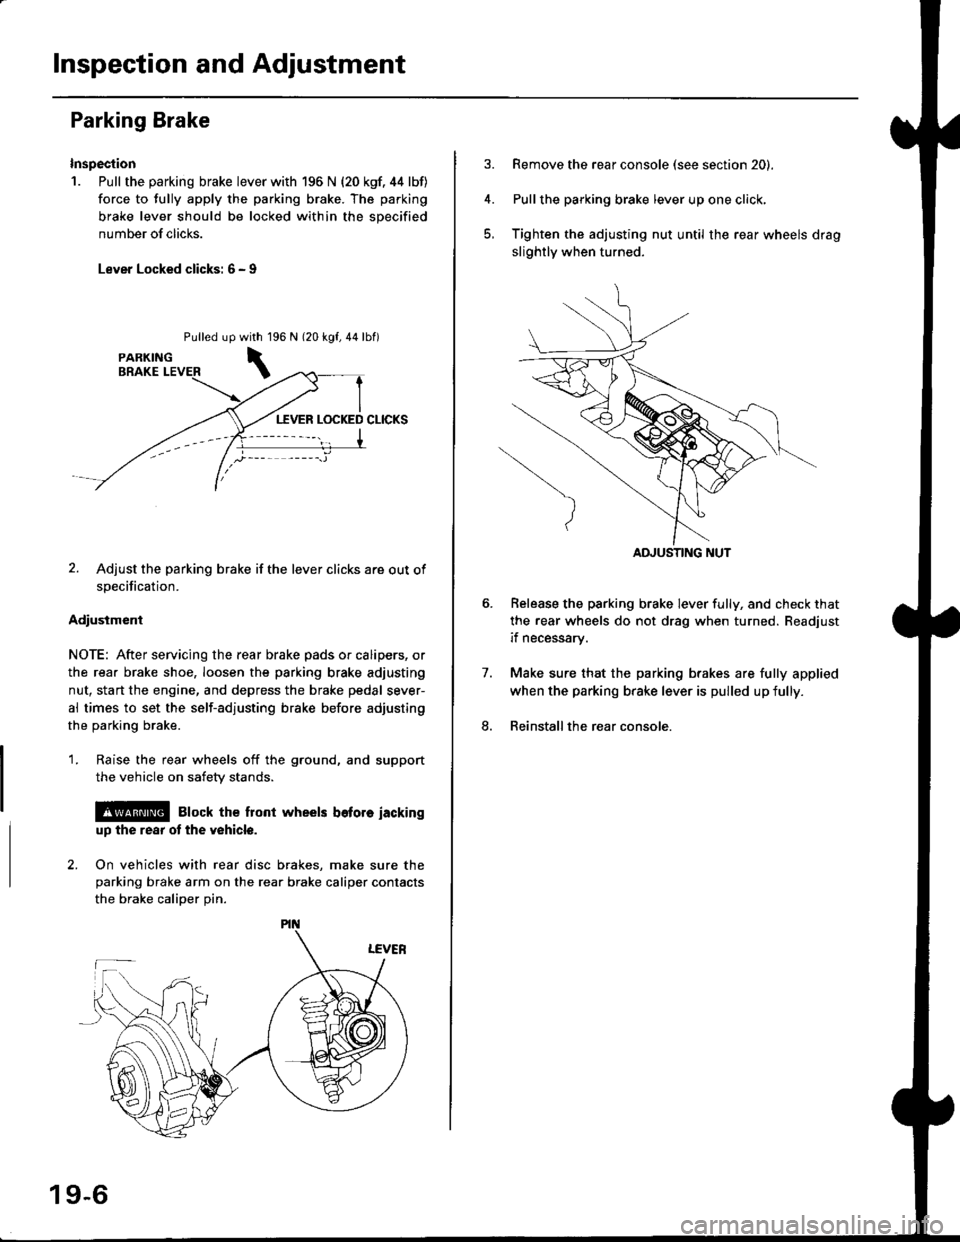 HONDA CIVIC 1996 6.G Service Manual Inspection and Adjustment
Parking Brake
Inspection
1. Pull the parking brake lever with 196 N {20 kgf. 44 lbf)
force to fully apply the parking brake. The parking
brake lever should be locked within t